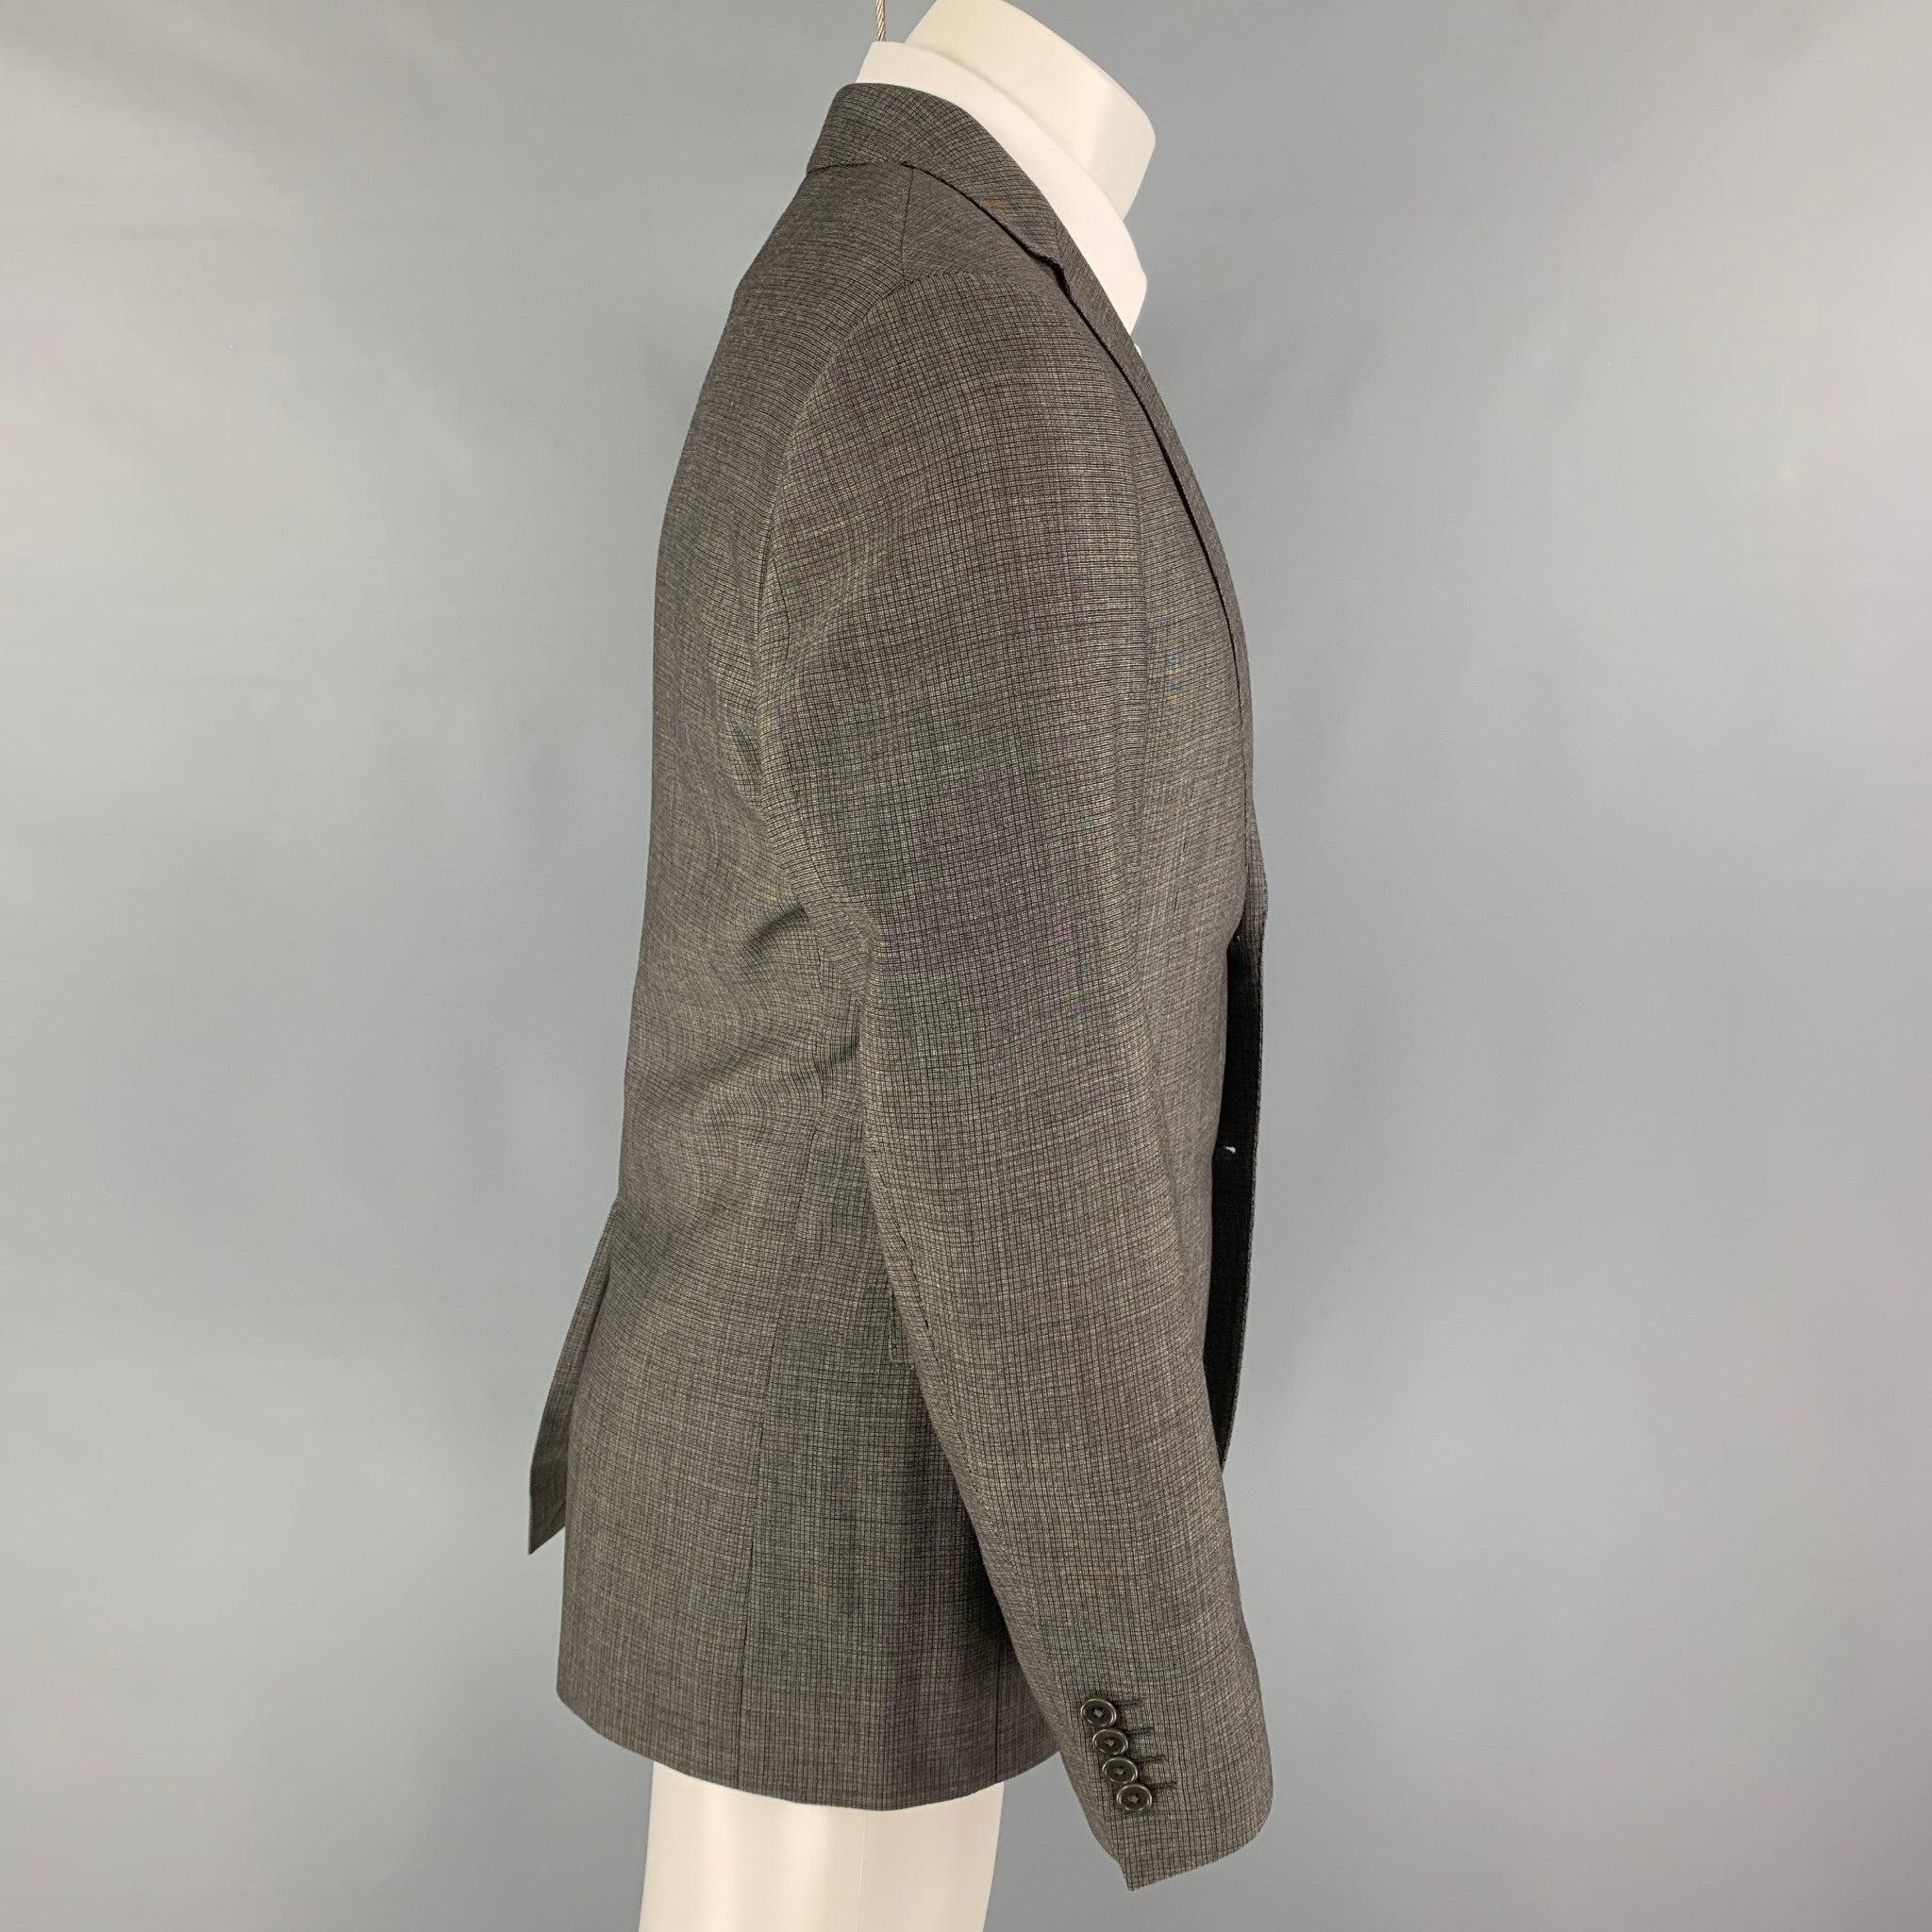 JOHN VARVATOS
sport coat comes in a grey & black wool with a full liner featuring a notch lapel, flap pockets, single back vent, and a double button closure. Excellent
Pre-Owned Condition. 

Marked:   Size tag removed 

Measurements: 
 
Shoulder: